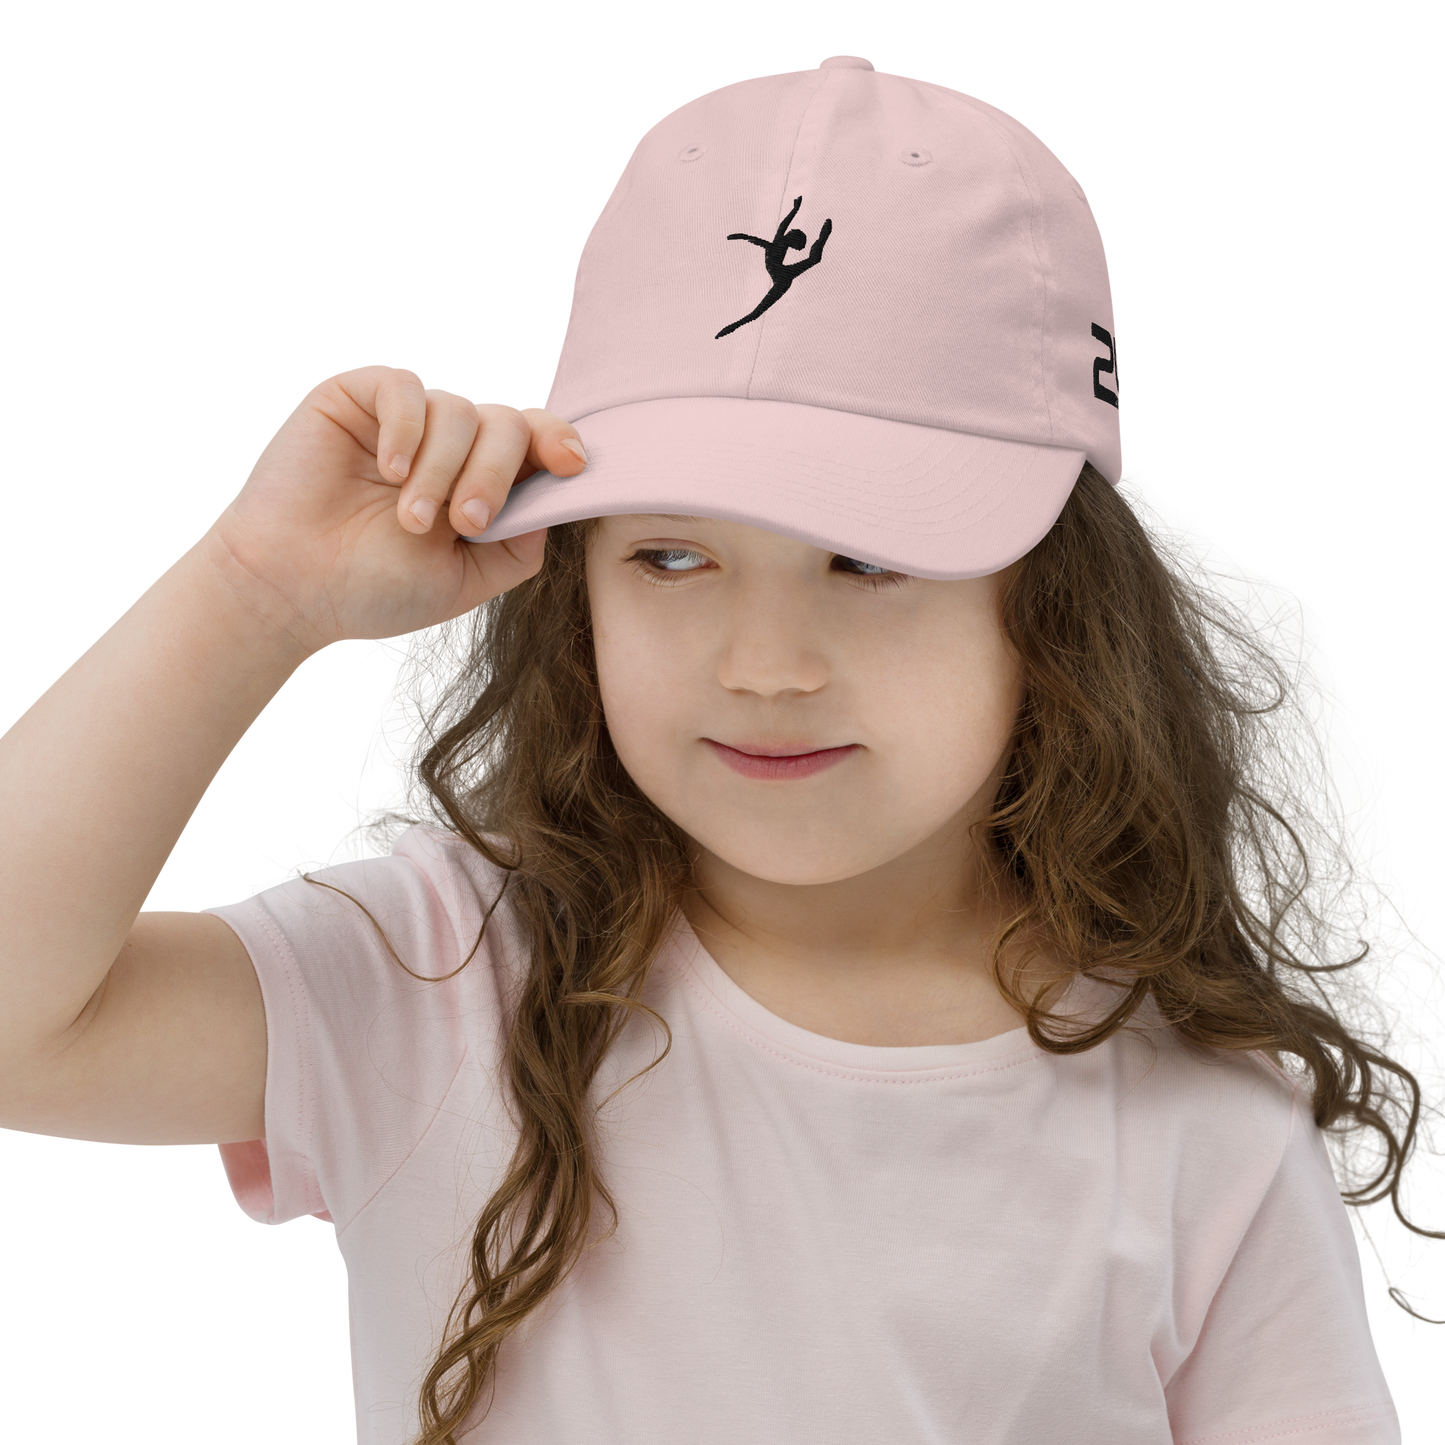 Dance Embroidered Youth Baseball Cap